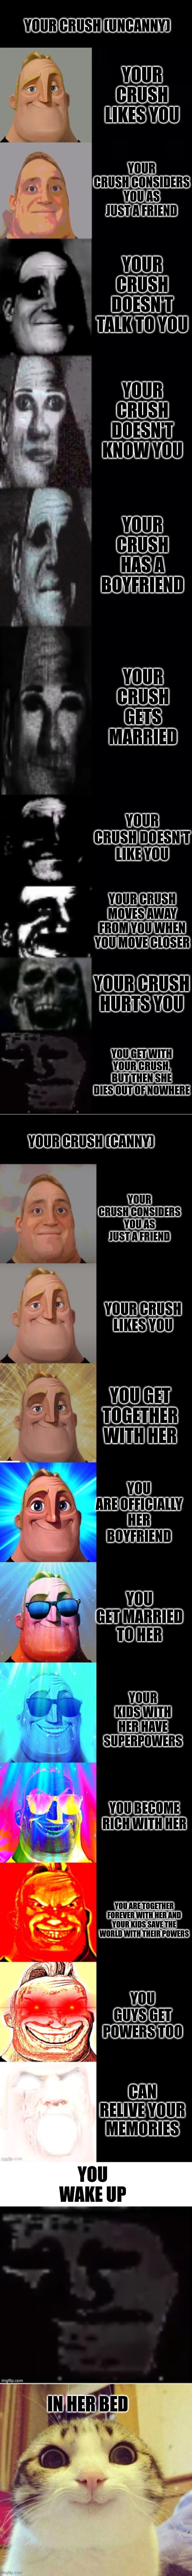 Story mode of your crush | YOUR CRUSH (UNCANNY); YOUR CRUSH LIKES YOU; YOUR CRUSH CONSIDERS YOU AS JUST A FRIEND; YOUR CRUSH DOESN'T TALK TO YOU; YOUR CRUSH DOESN'T KNOW YOU; YOUR CRUSH HAS A BOYFRIEND; YOUR CRUSH GETS MARRIED; YOUR CRUSH DOESN'T LIKE YOU; YOUR CRUSH MOVES AWAY FROM YOU WHEN YOU MOVE CLOSER; YOUR CRUSH HURTS YOU; YOU GET WITH YOUR CRUSH, BUT THEN SHE DIES OUT OF NOWHERE; YOUR CRUSH (CANNY); YOUR CRUSH CONSIDERS YOU AS JUST A FRIEND; YOUR CRUSH LIKES YOU; YOU GET TOGETHER WITH HER; YOU ARE OFFICIALLY HER BOYFRIEND; YOU GET MARRIED TO HER; YOUR KIDS WITH HER HAVE SUPERPOWERS; YOU BECOME RICH WITH HER; YOU ARE TOGETHER FOREVER WITH HER AND YOUR KIDS SAVE THE WORLD WITH THEIR POWERS; YOU GUYS GET POWERS TOO; CAN RELIVE YOUR MEMORIES; YOU WAKE UP; IN HER BED | image tagged in mr incredible becoming uncanny,mr incredible becoming canny,uncanny troll,memes,smiling cat | made w/ Imgflip meme maker